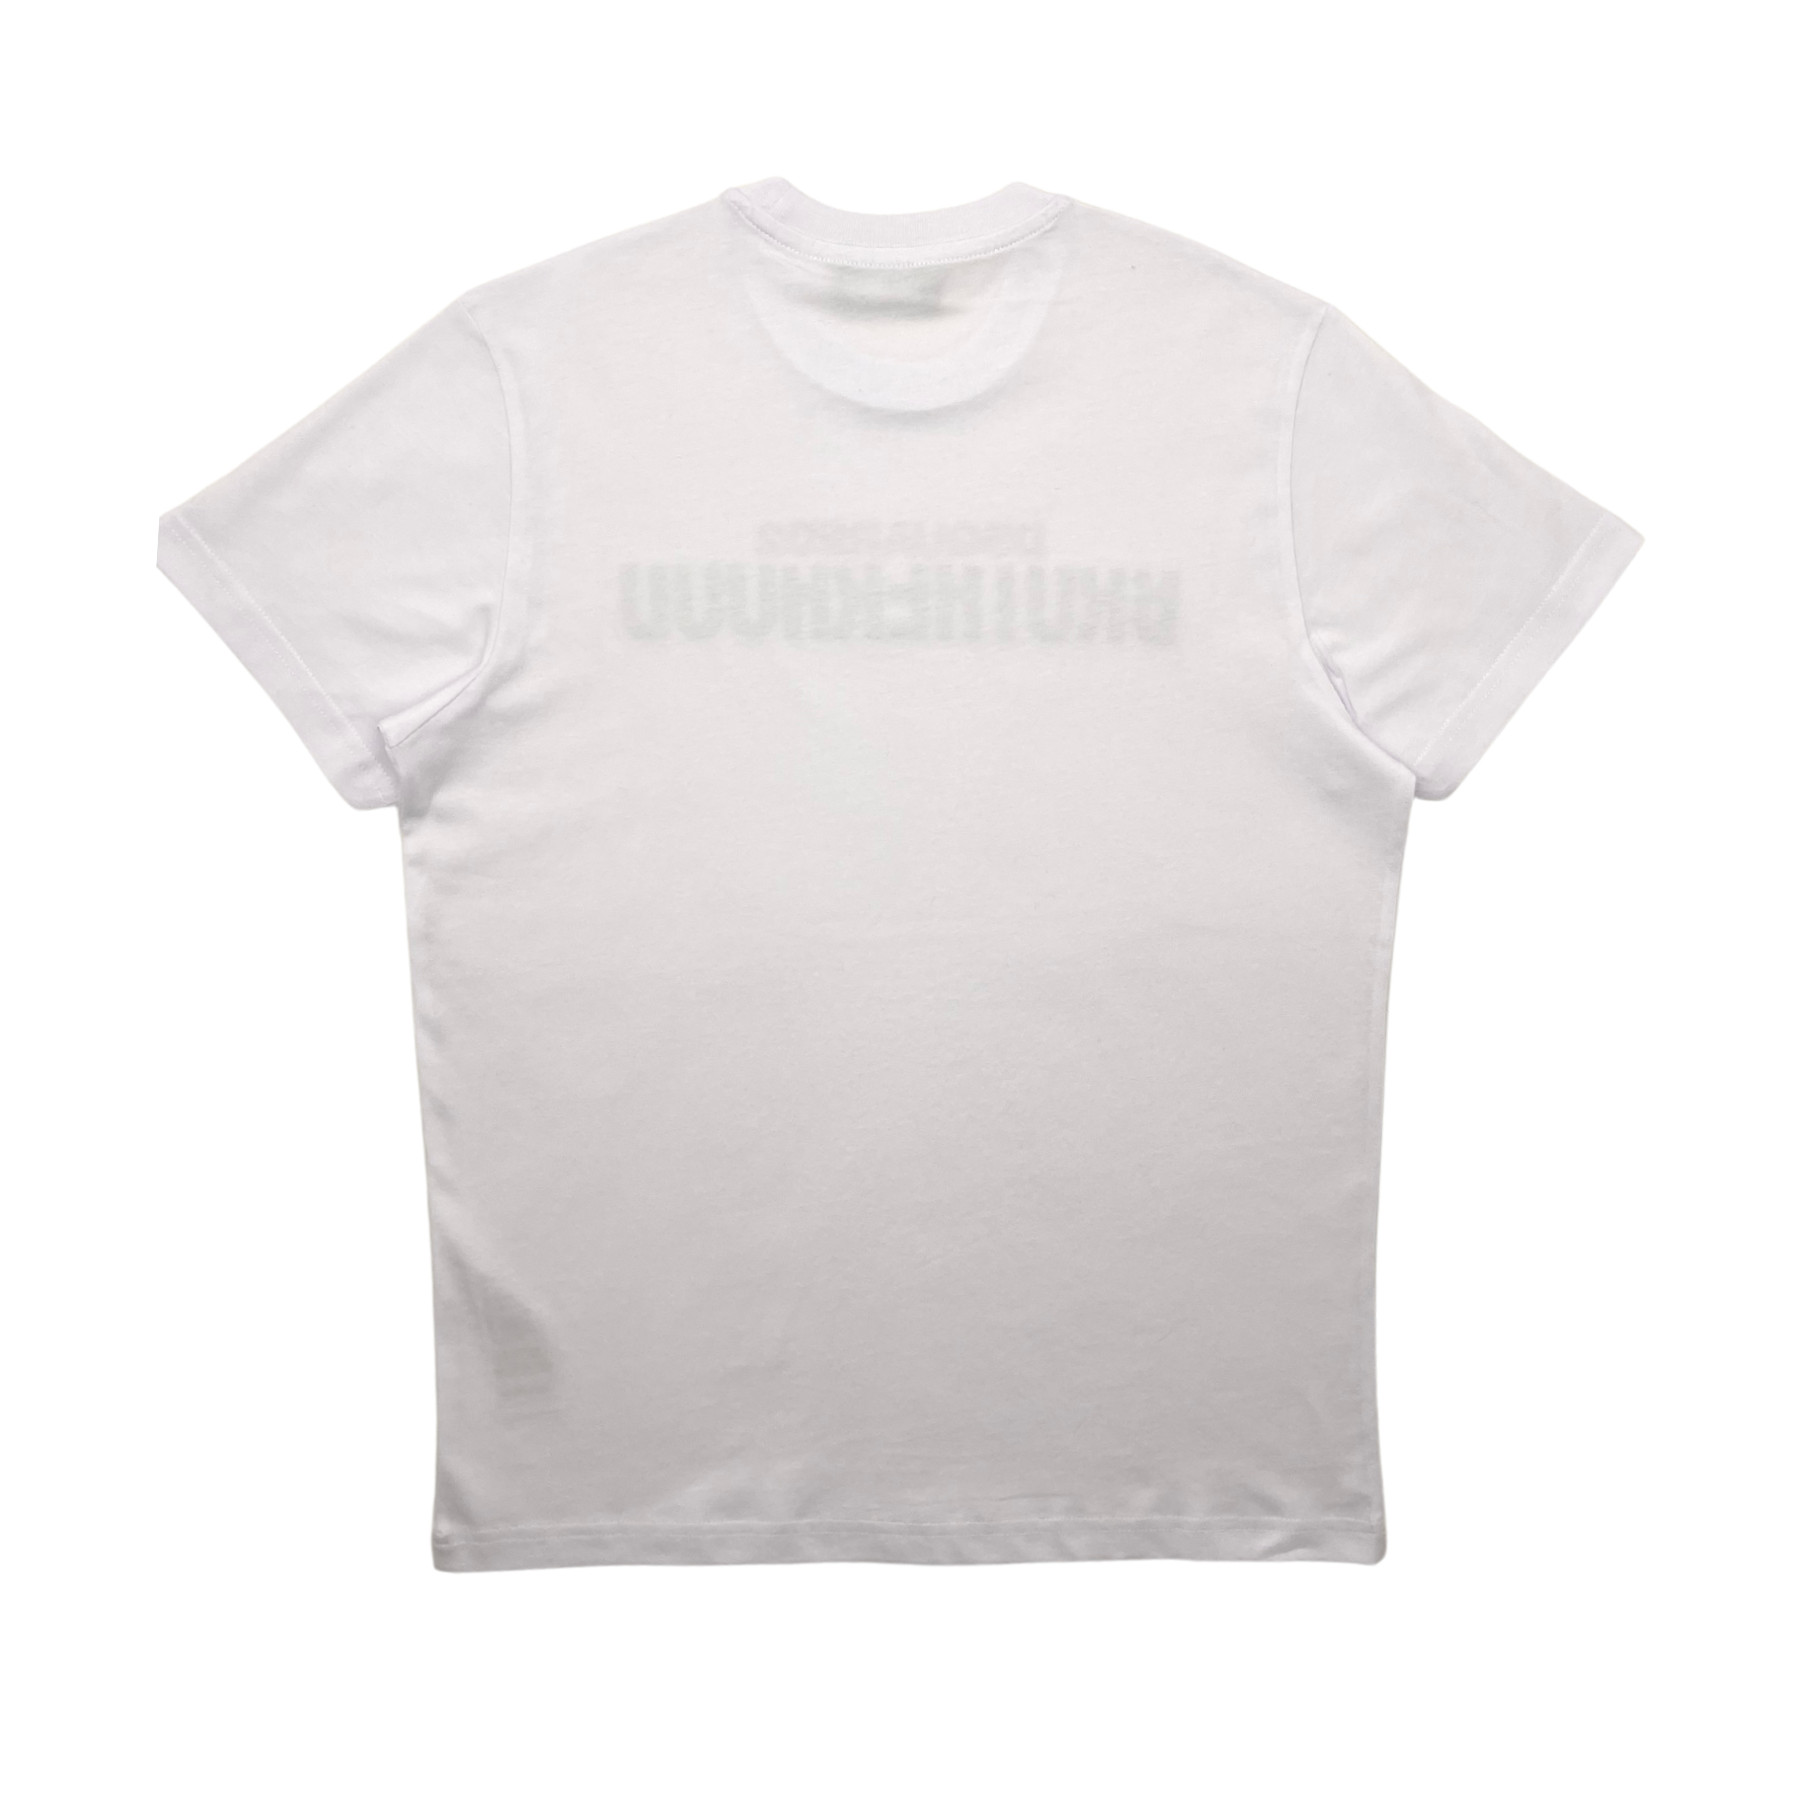 DSQUARED2 - Brotherhood T-shirt - 12 years old